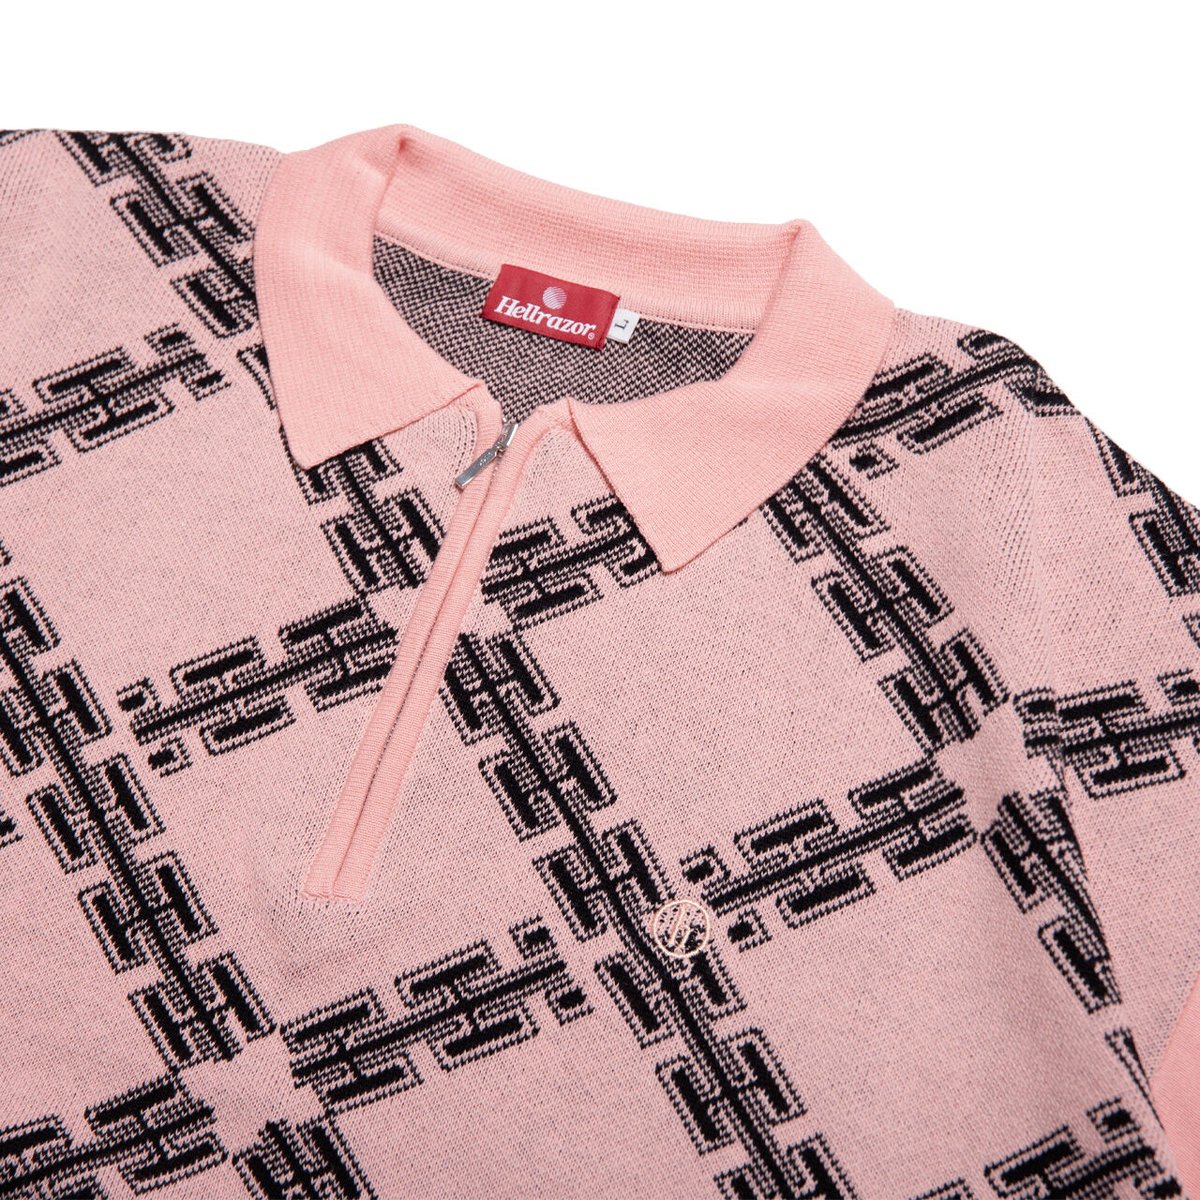 HELLRAZOR HR CORPS KNITTED POLO SHIRT - PINK